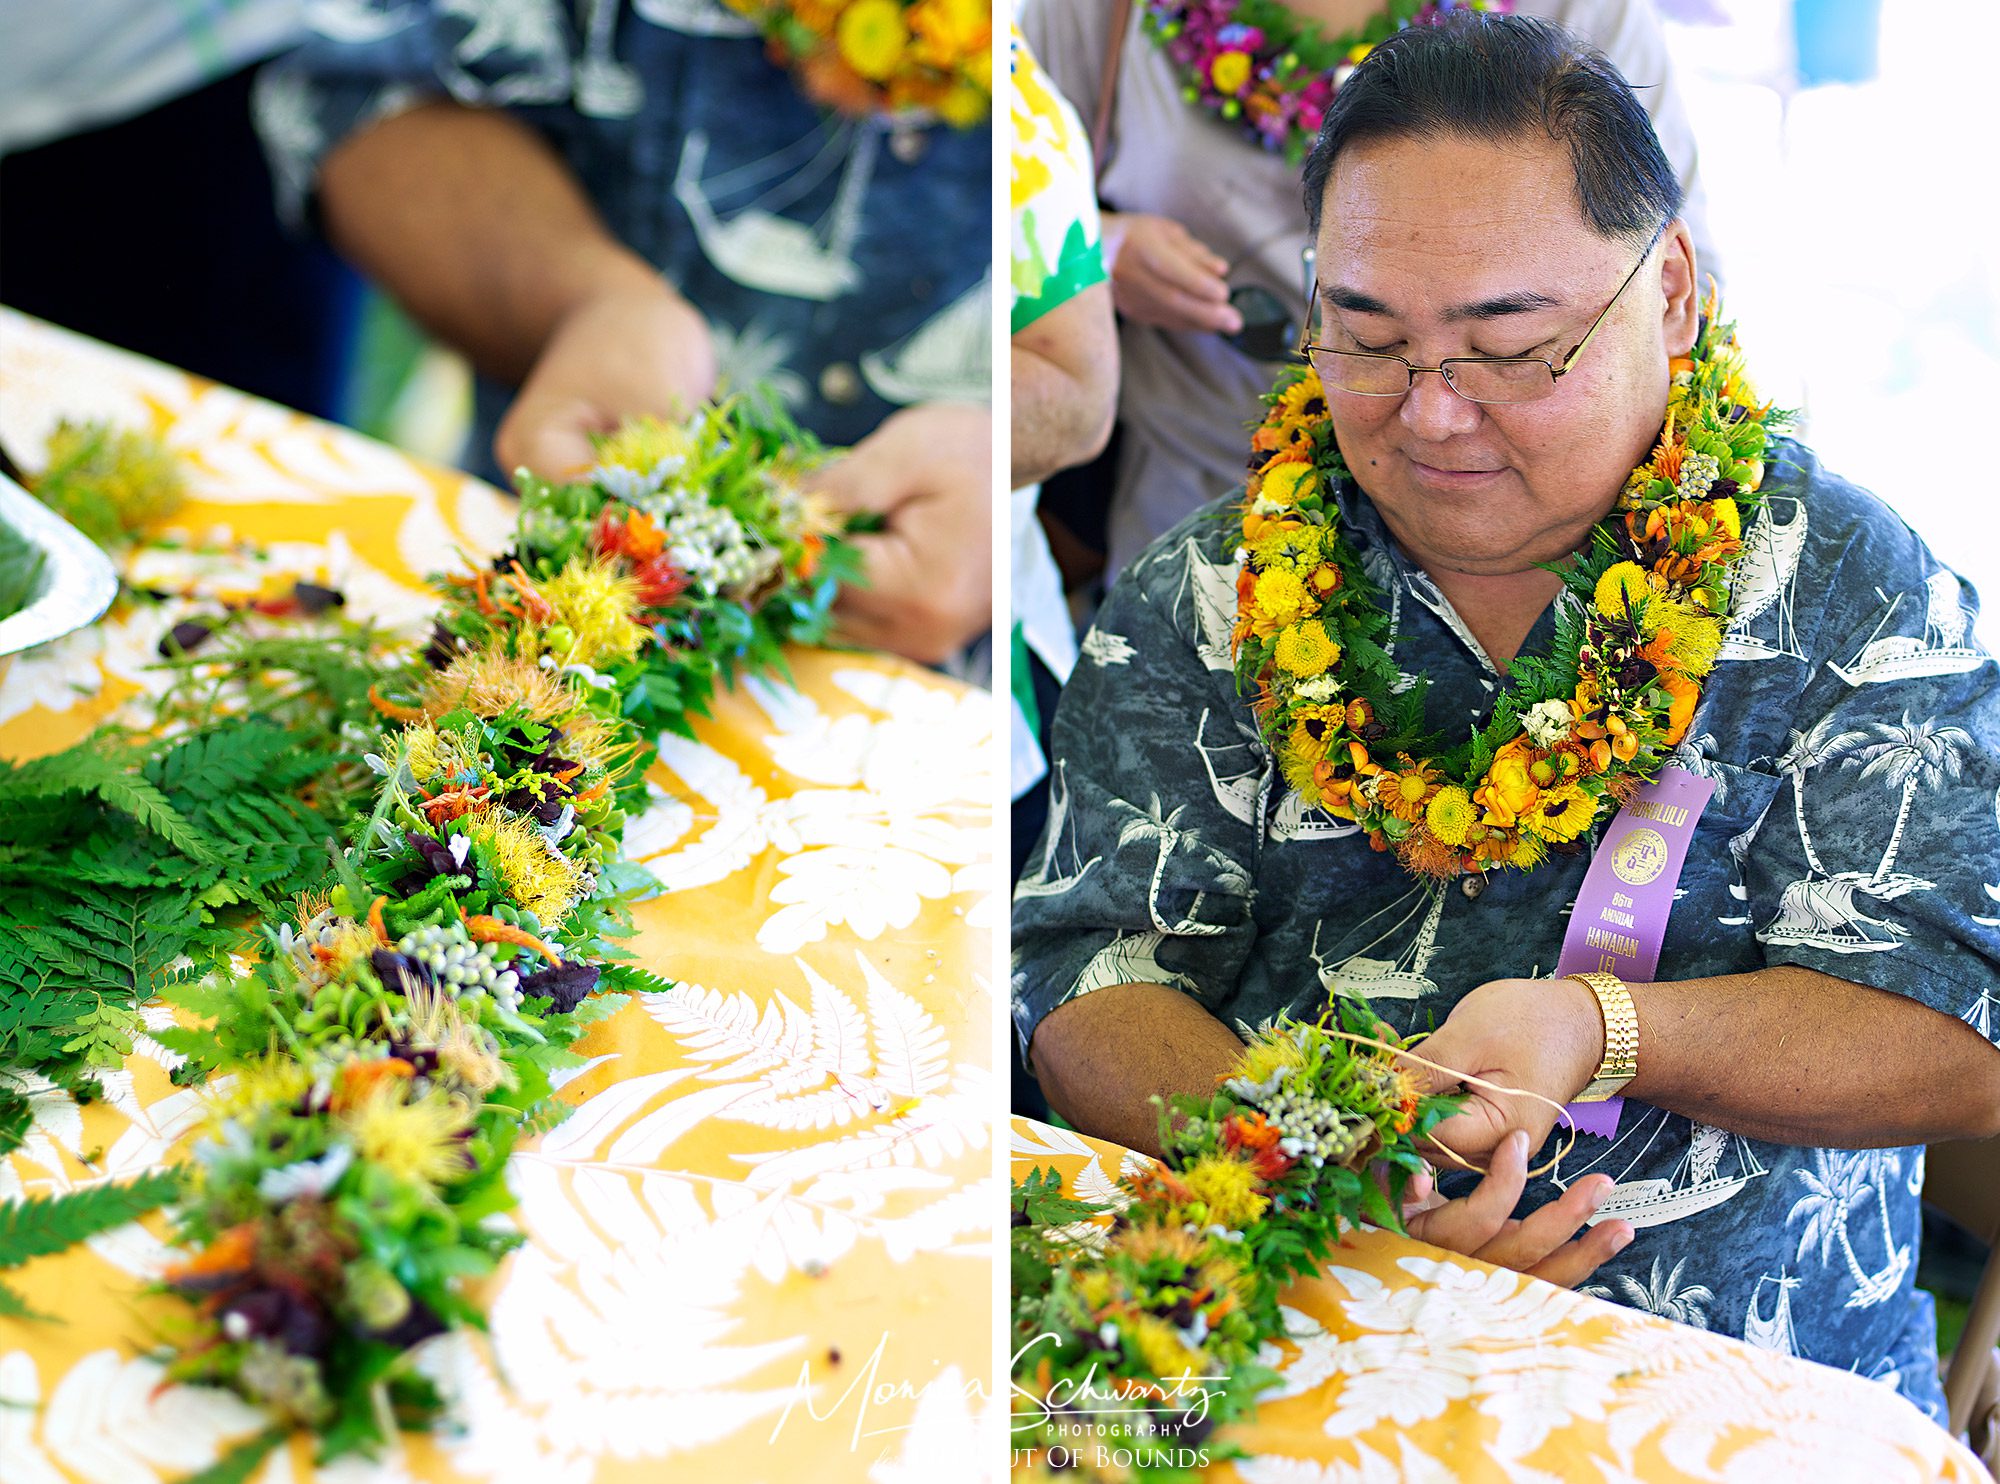 Lei-making-demonstration-at-the-May-Day-celebrations-in-Honolulu-Hawaii-2013